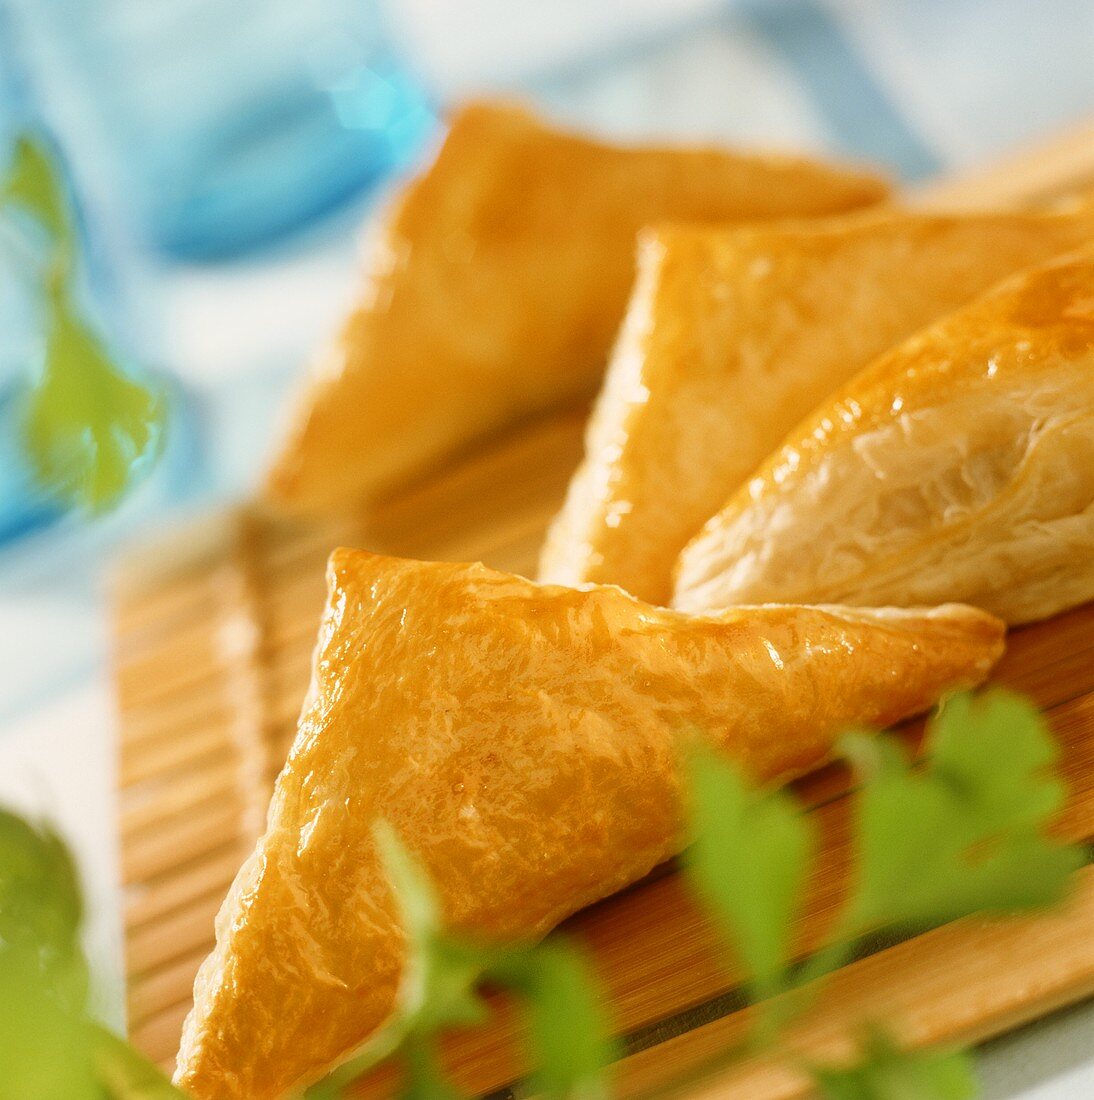 Chinese puff pastries with savoury filling